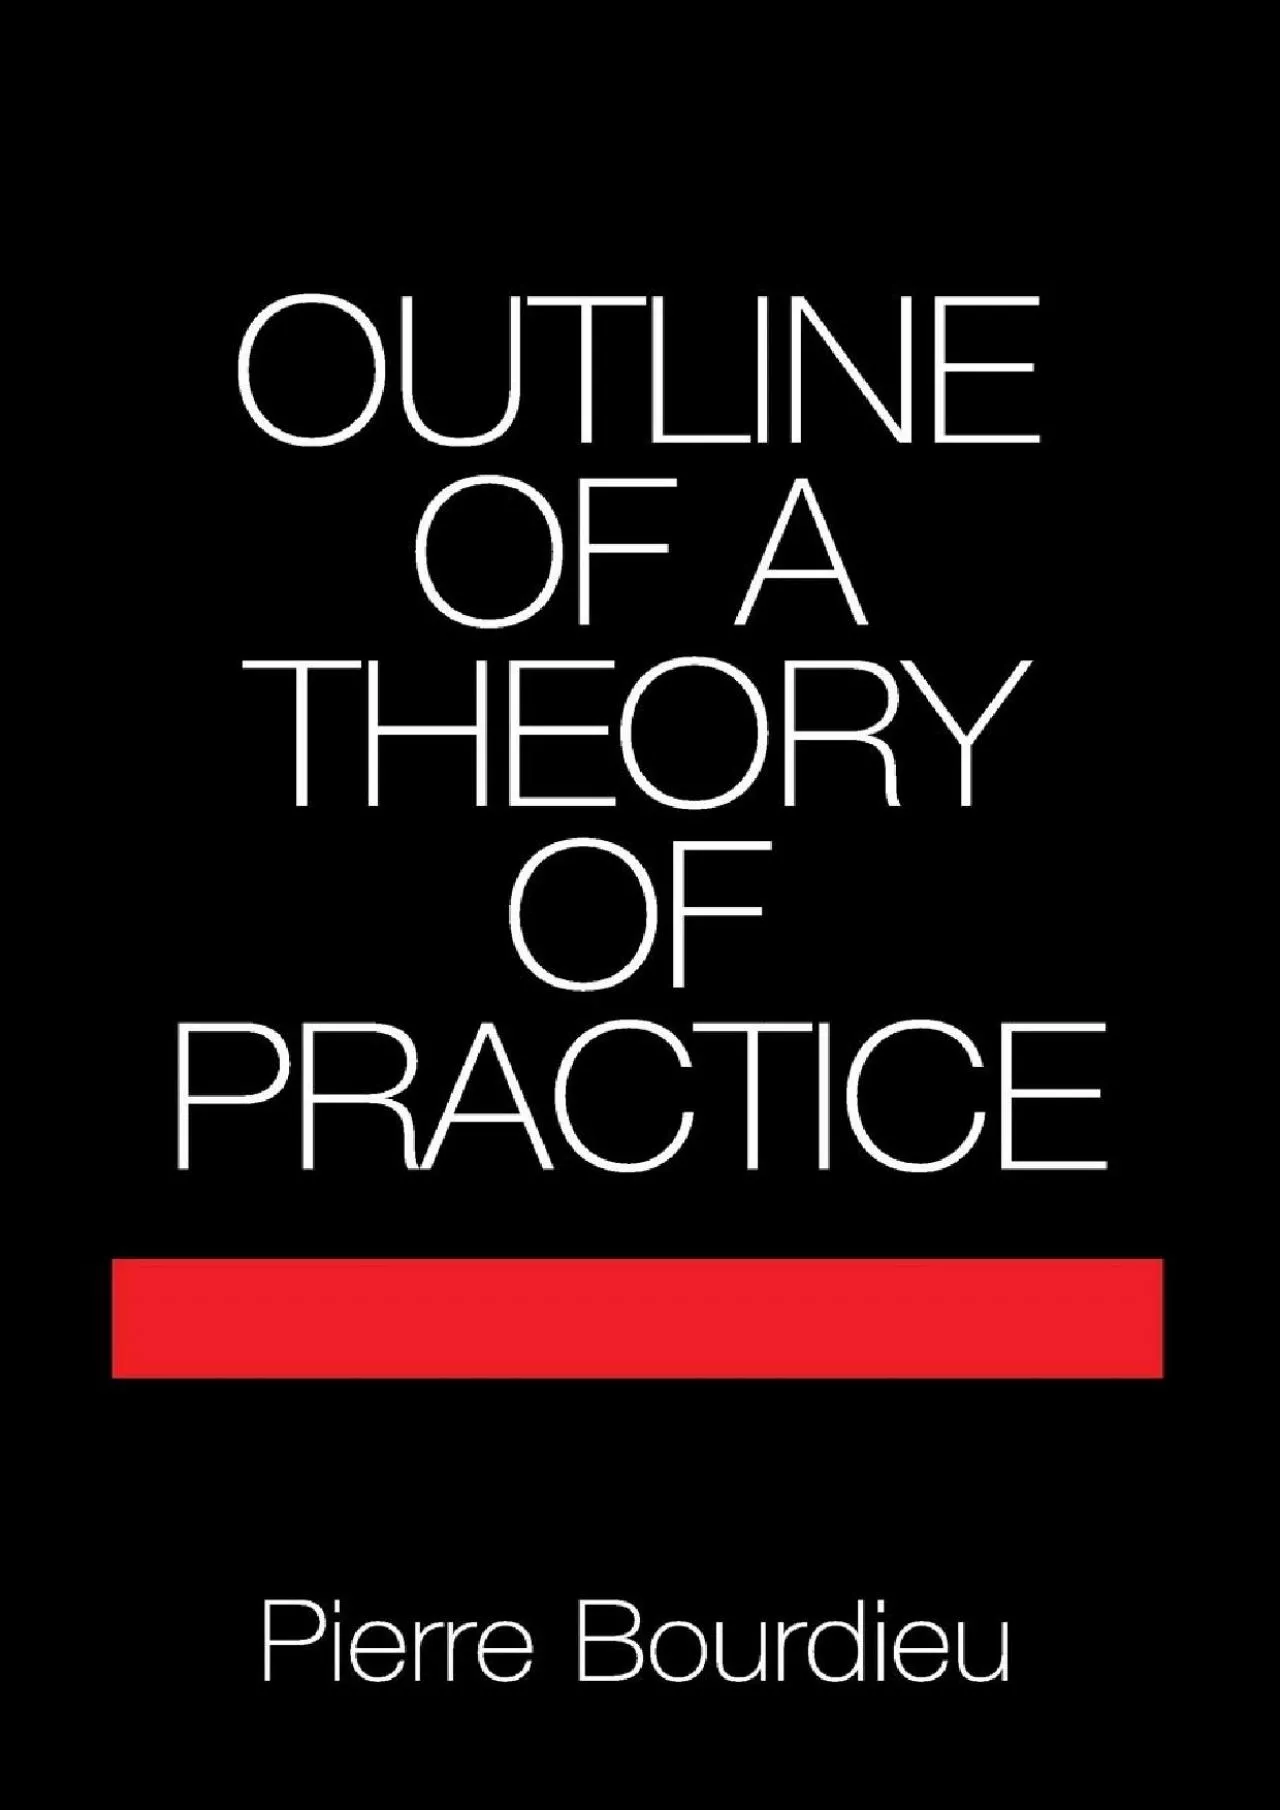 (EBOOK)-Outline of a Theory of Practice (Cambridge Studies in Social and Cultural Anthropology,